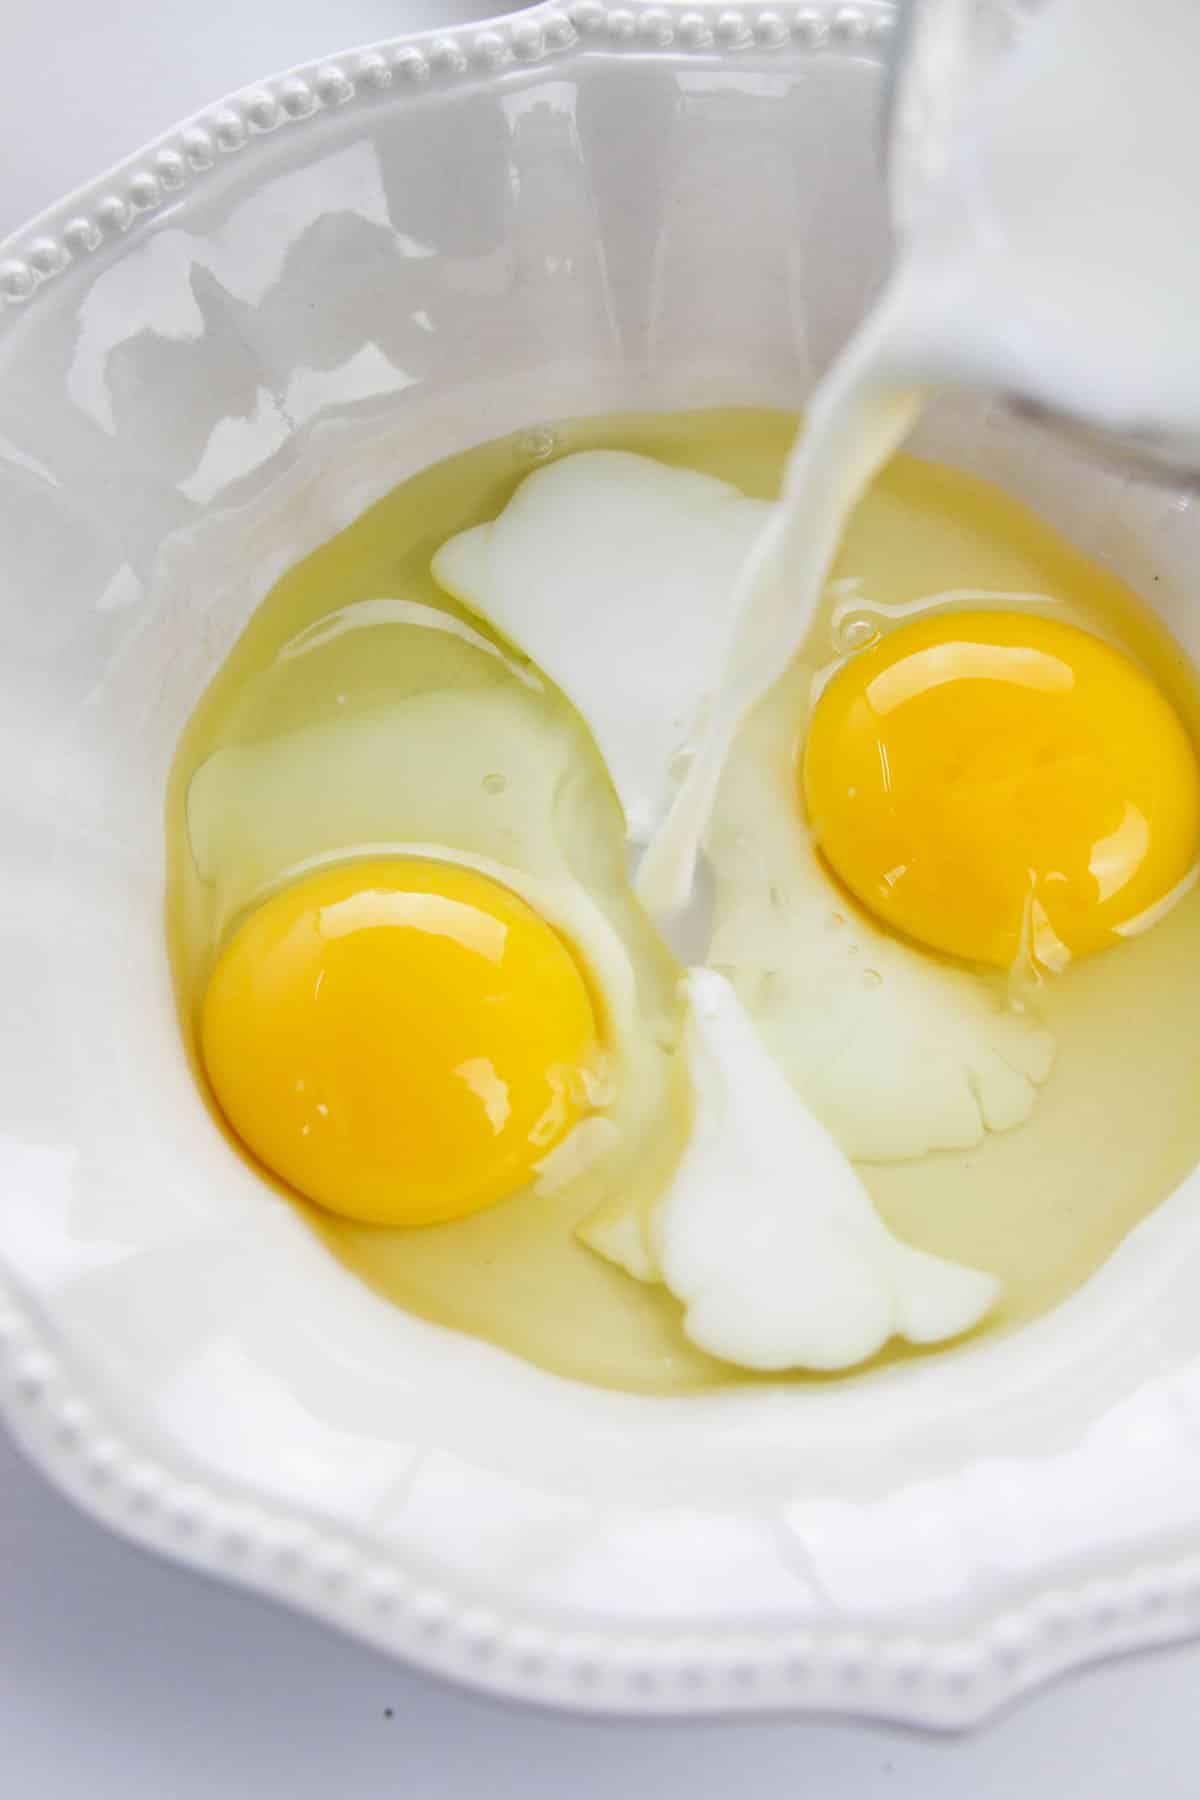 Milk and eggs in a white shallow dish